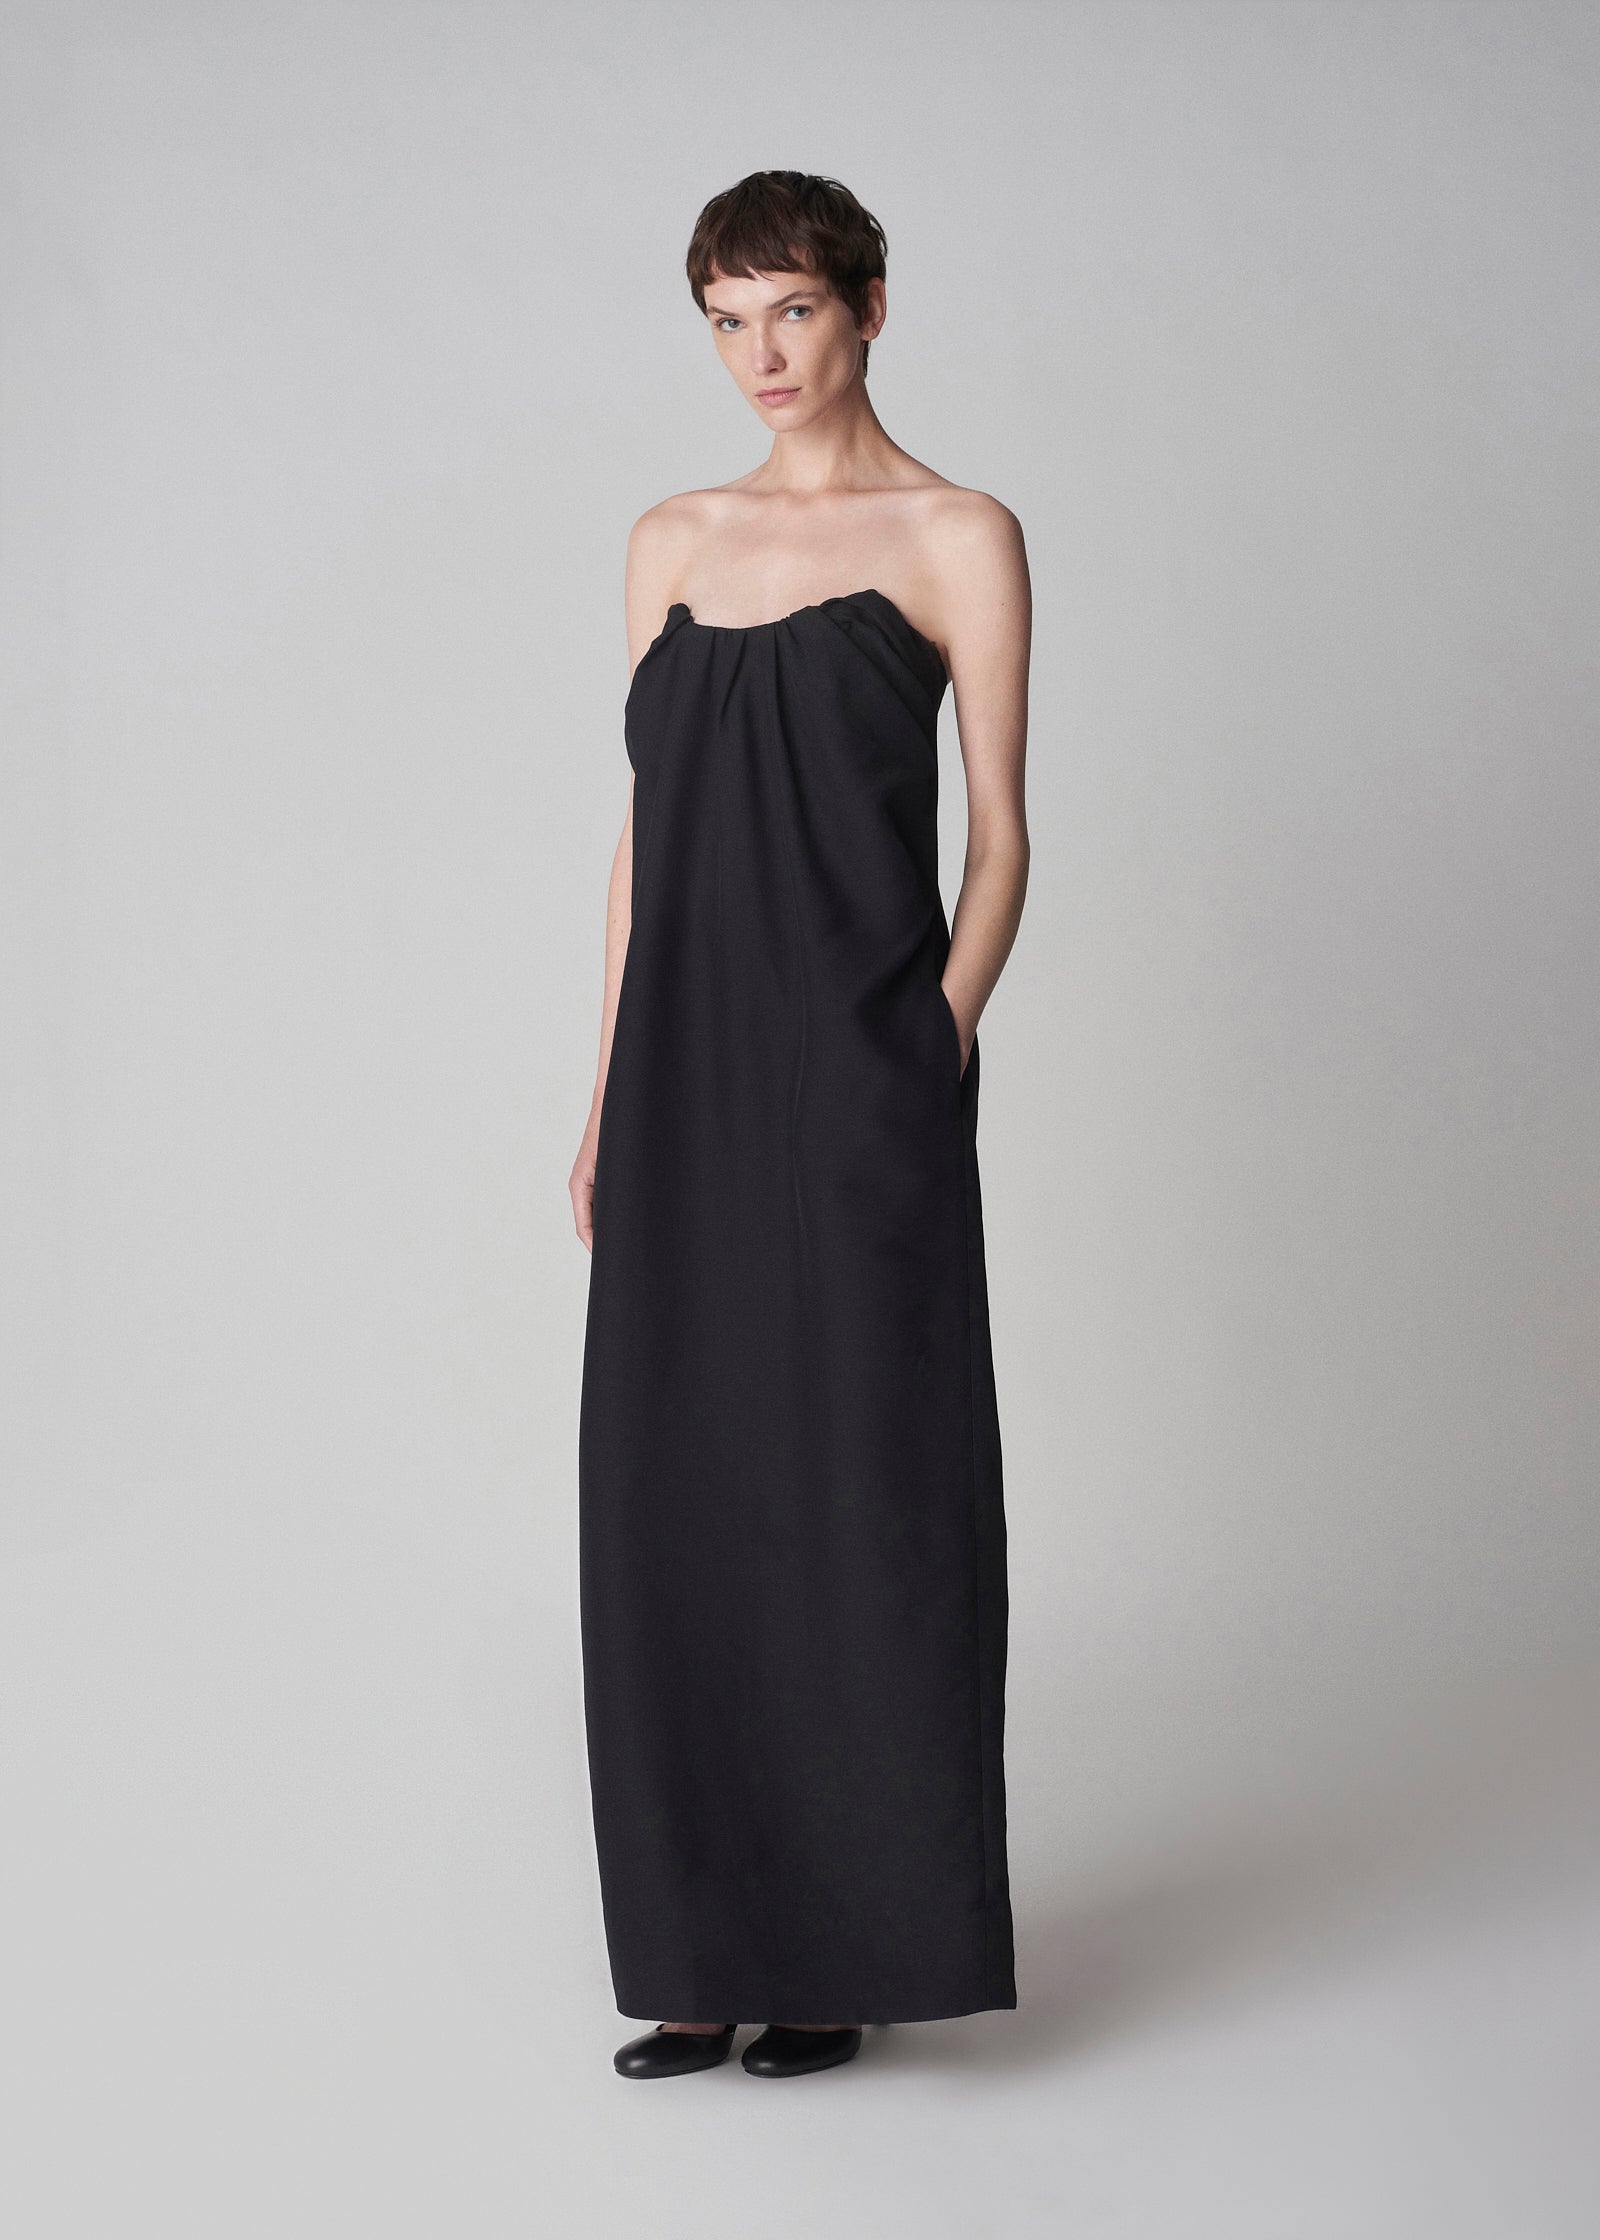 Bustier Dress in Smooth Faille - Black - CO Collections